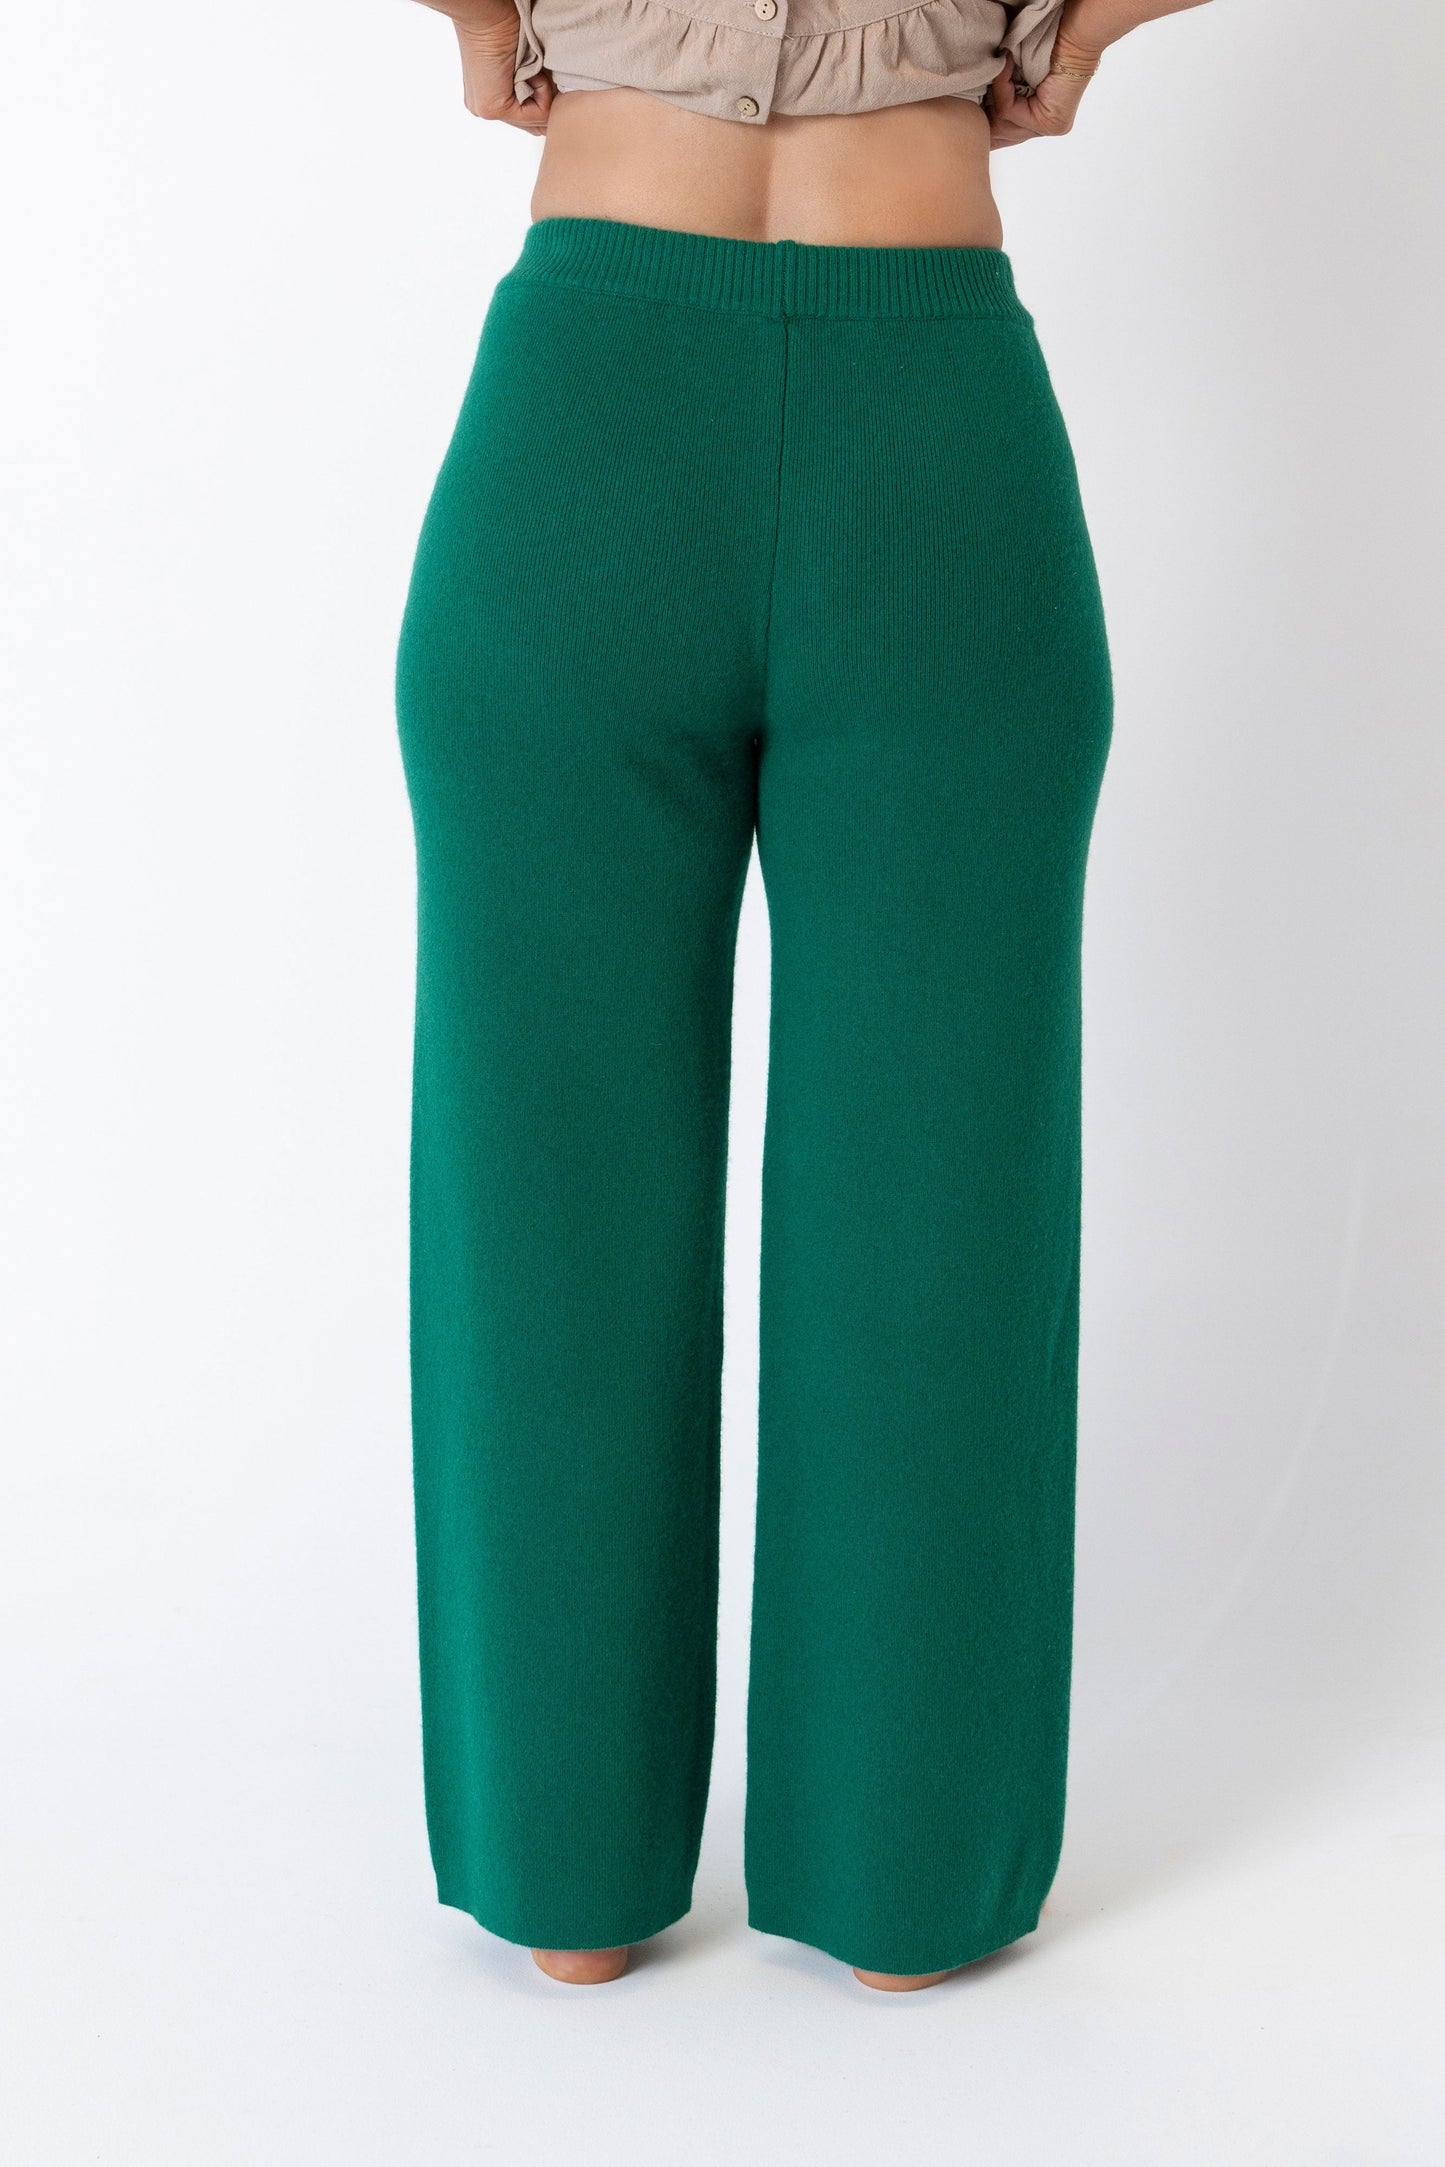 ALESSIA HIGH RISE KNIT PANT BRIGHT GREEN